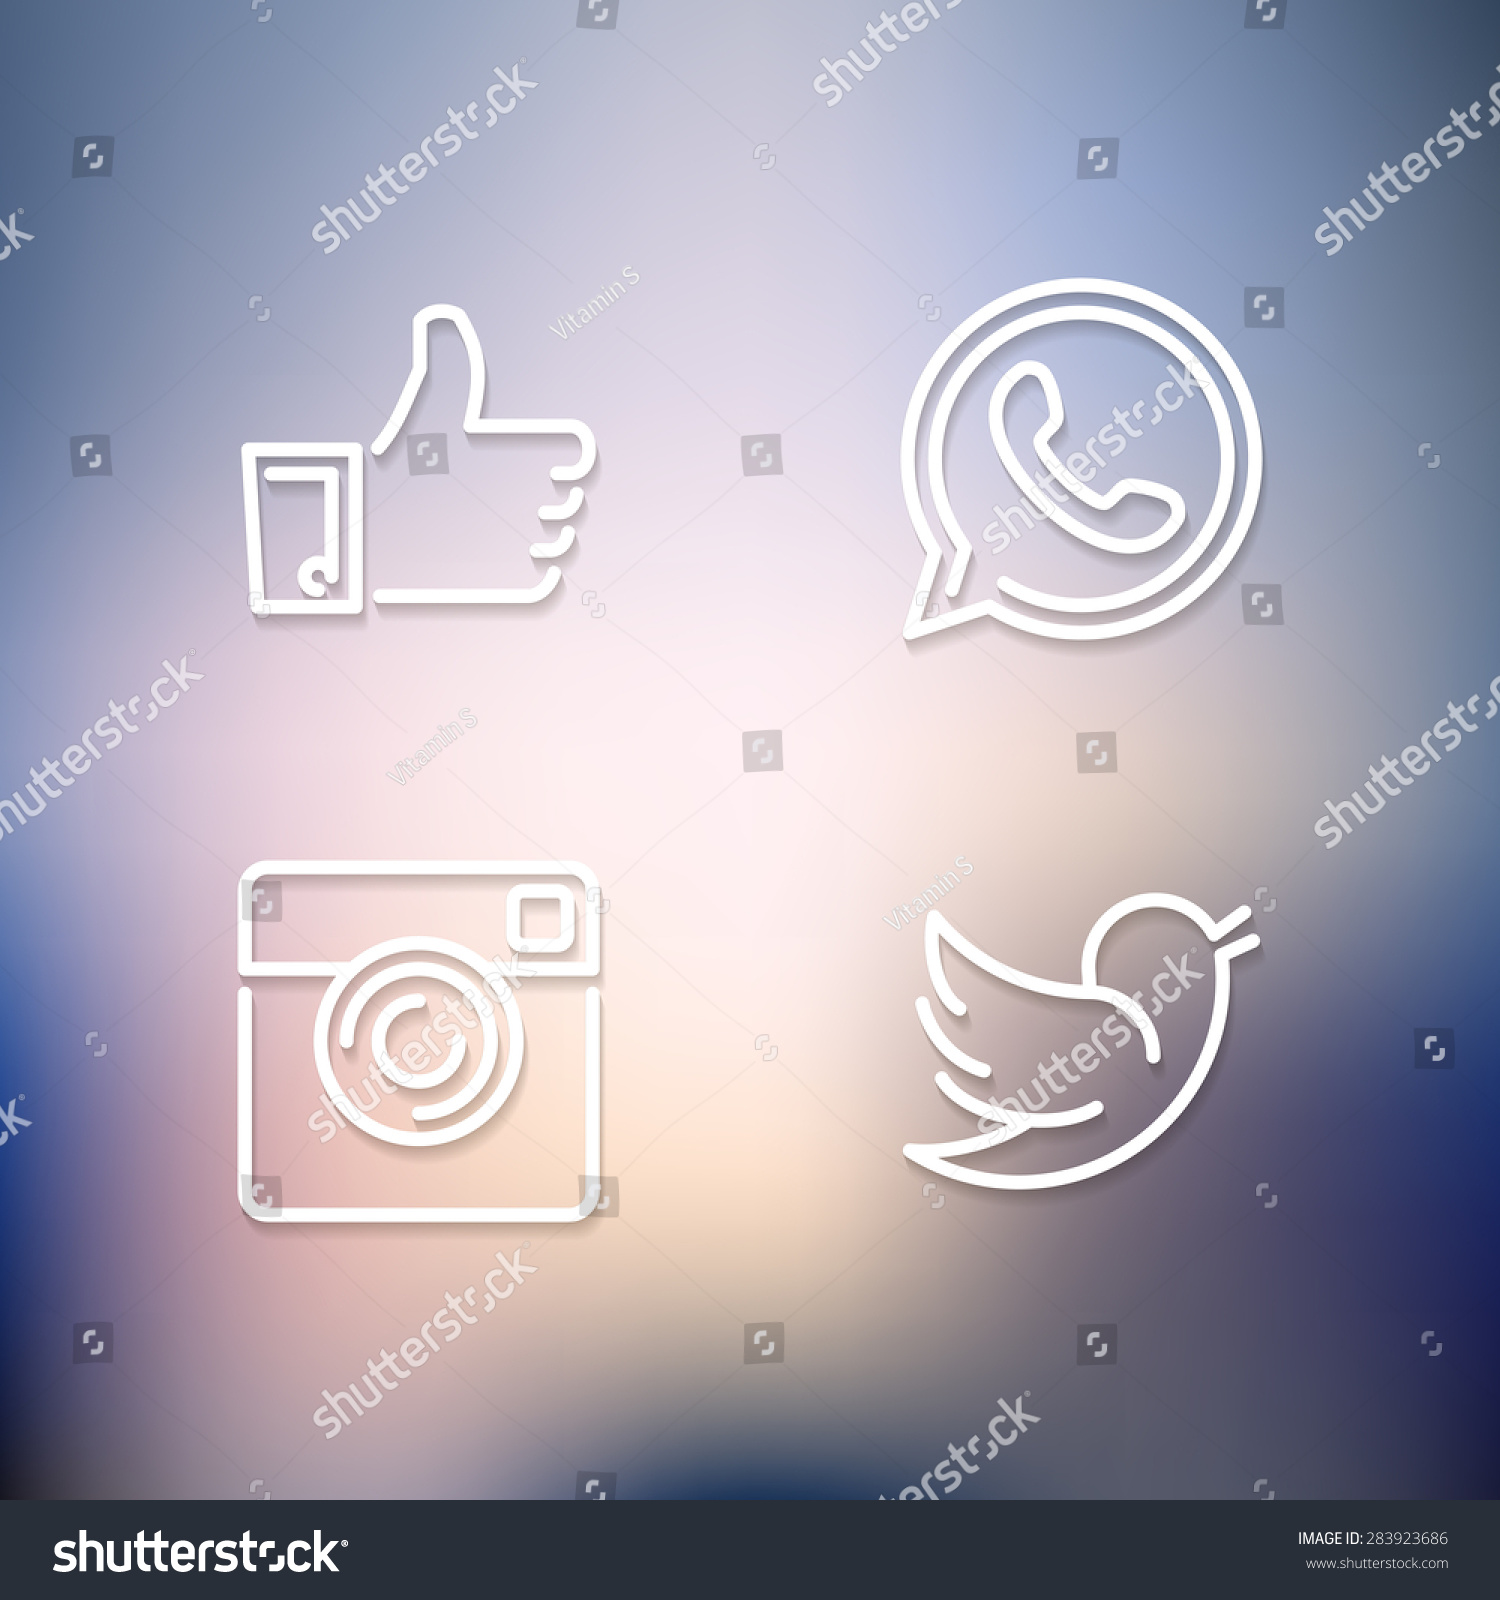 Line designed vector icons of like, handset, camera and bird on blurred background for social media, websites, interfaces. Social media icons eps. #283923686